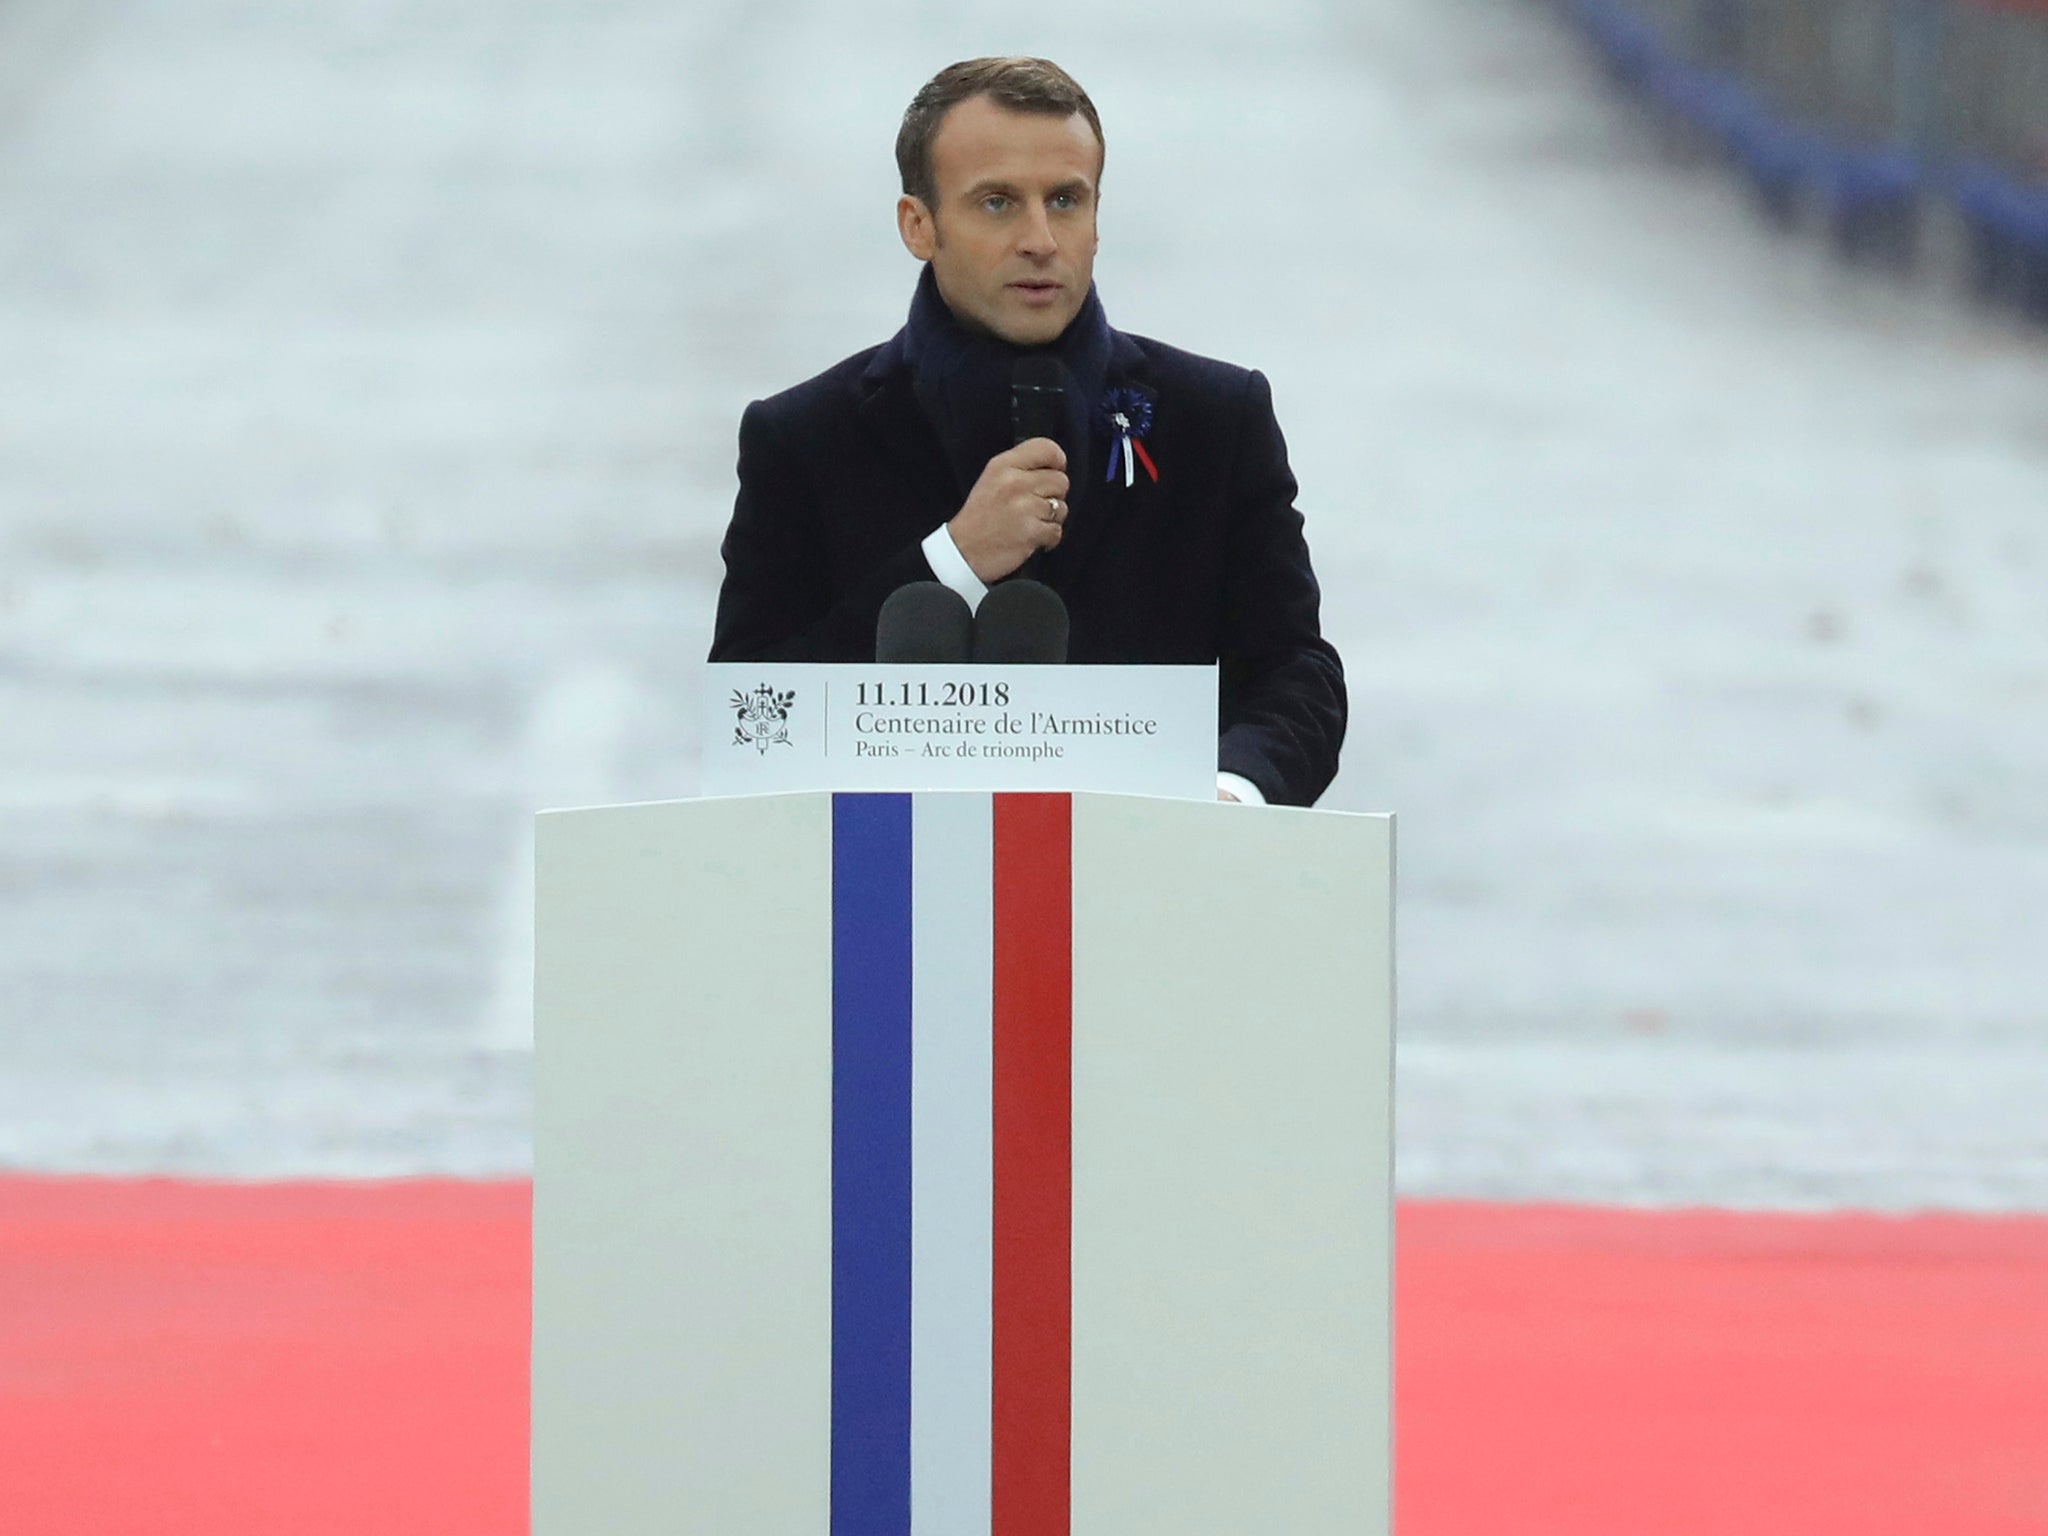 Emmanuel Macron warns of &apos;dangers&apos; of nationalism in Armistice speech aimed at Trump and Putin